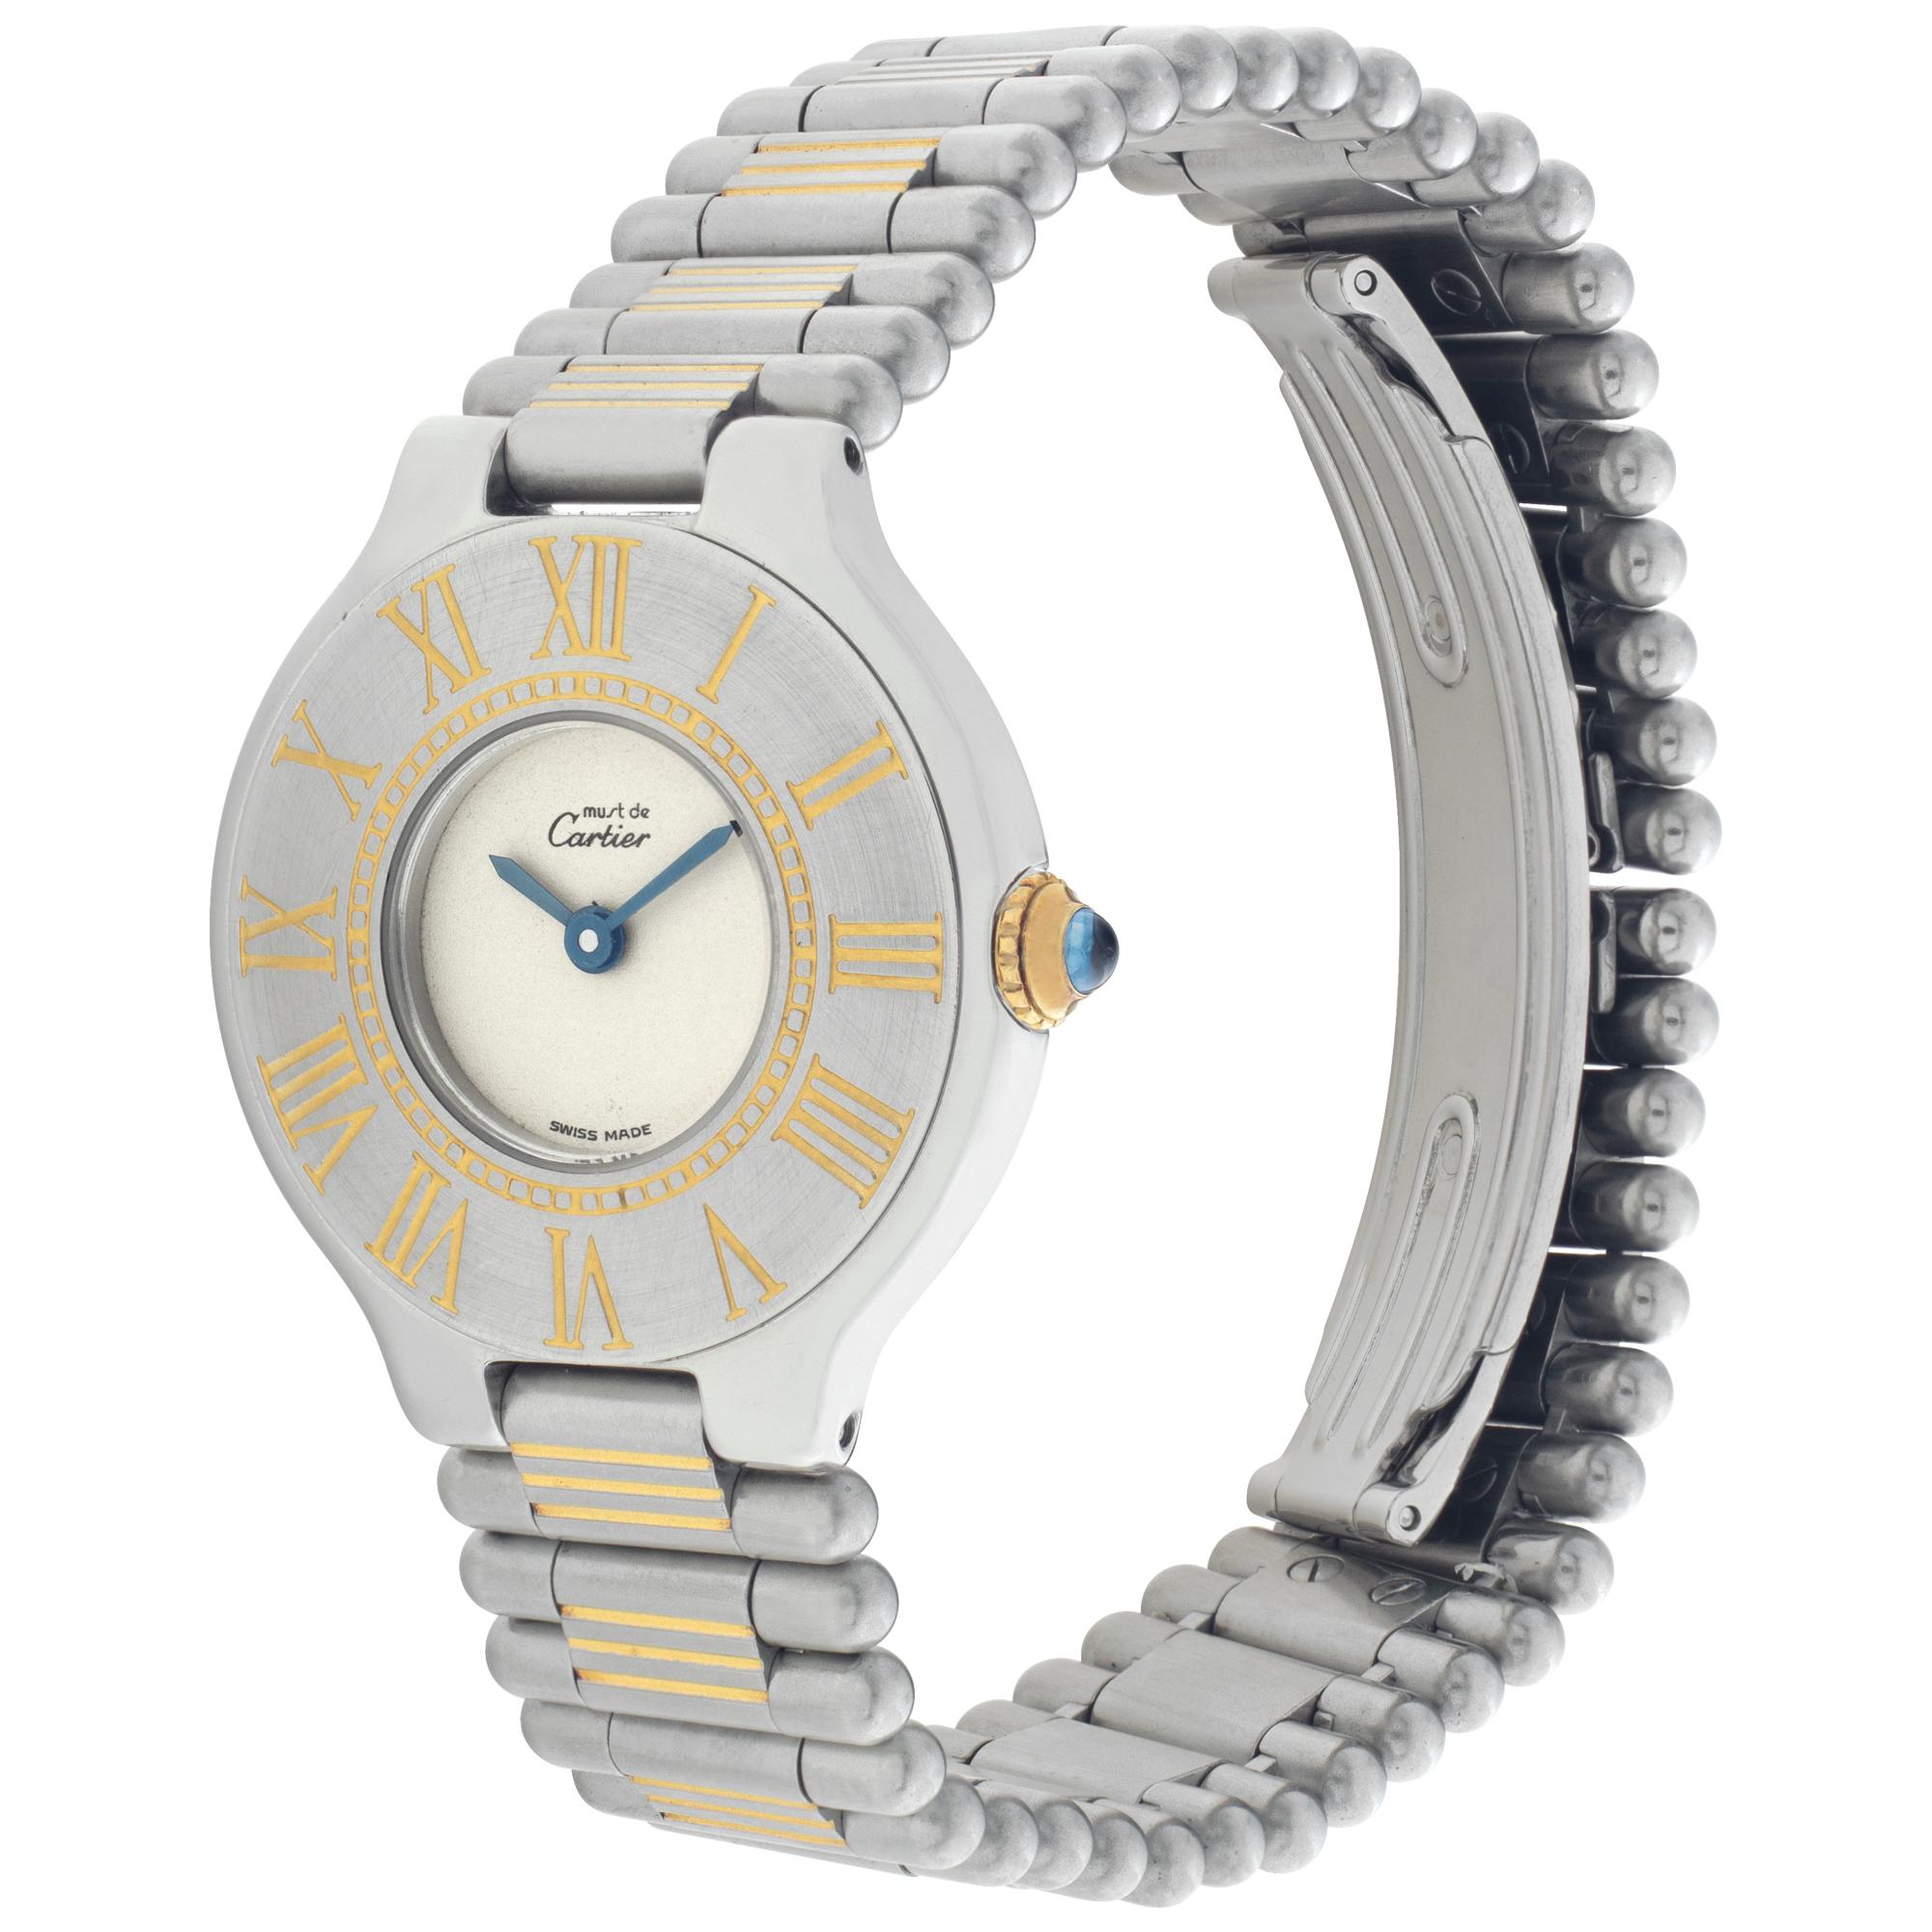 Cartier Must 21 in stainless steel with gold plate accents. Quartz. 26 mm case size. Ref. 1340. Circa 1990s. Fine Pre-owned Cartier Watch. Certified preowned Dress Cartier Must 21 1340 watch is made out of Stainless steel on a Stainless Steel